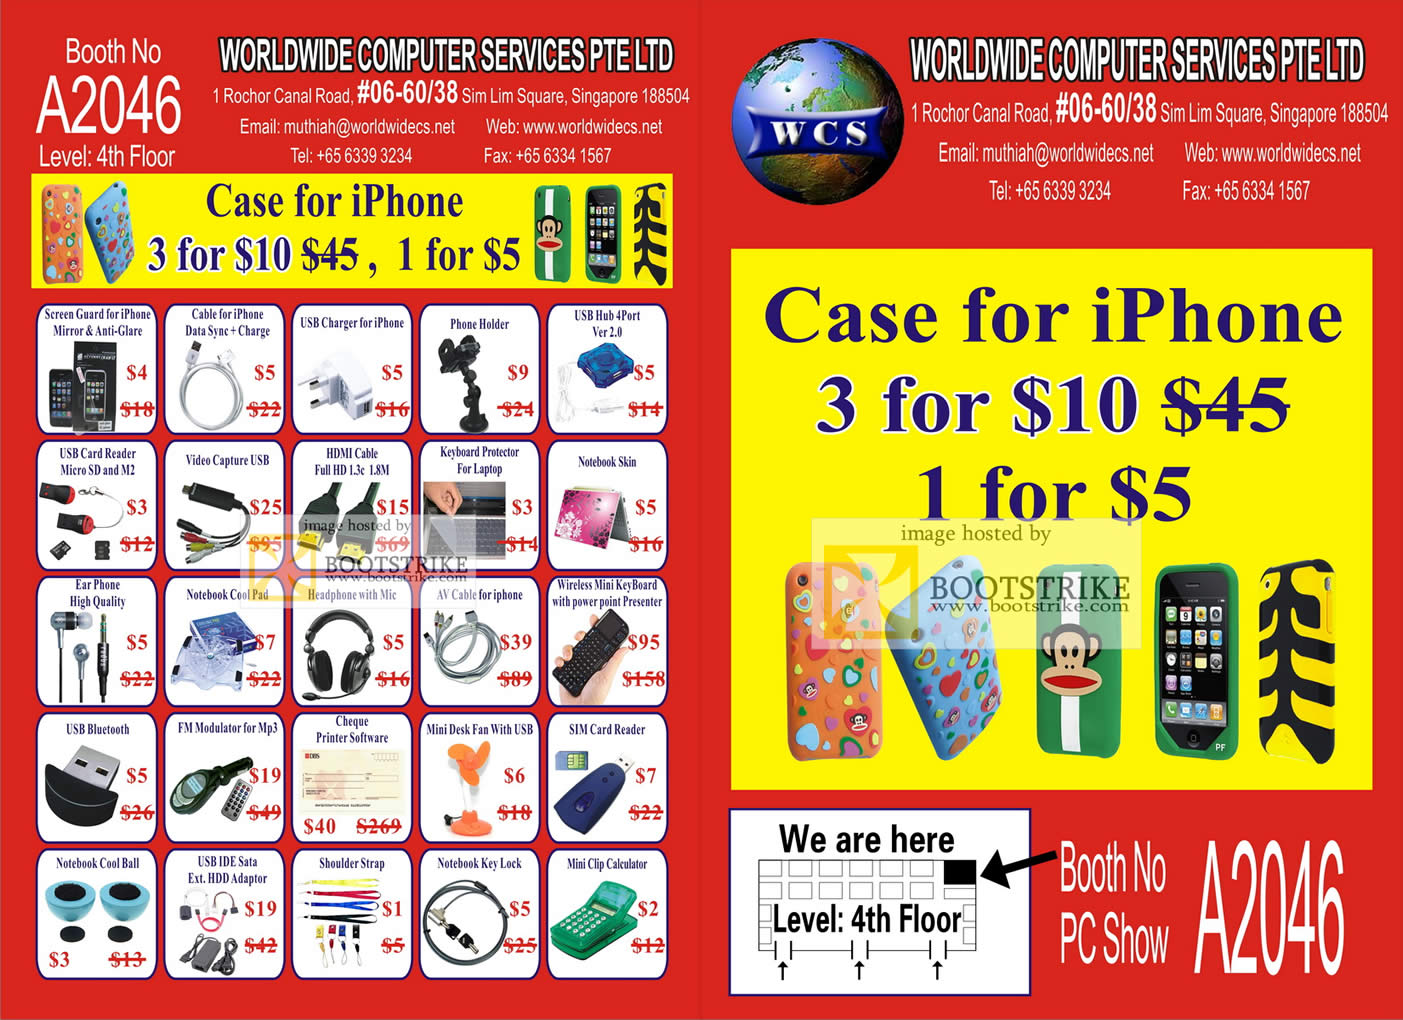 PC Show 2011 price list image brochure of Worldwide Computer Accessories Cable IPhone Case Card Reader USB HDMI Video Capture